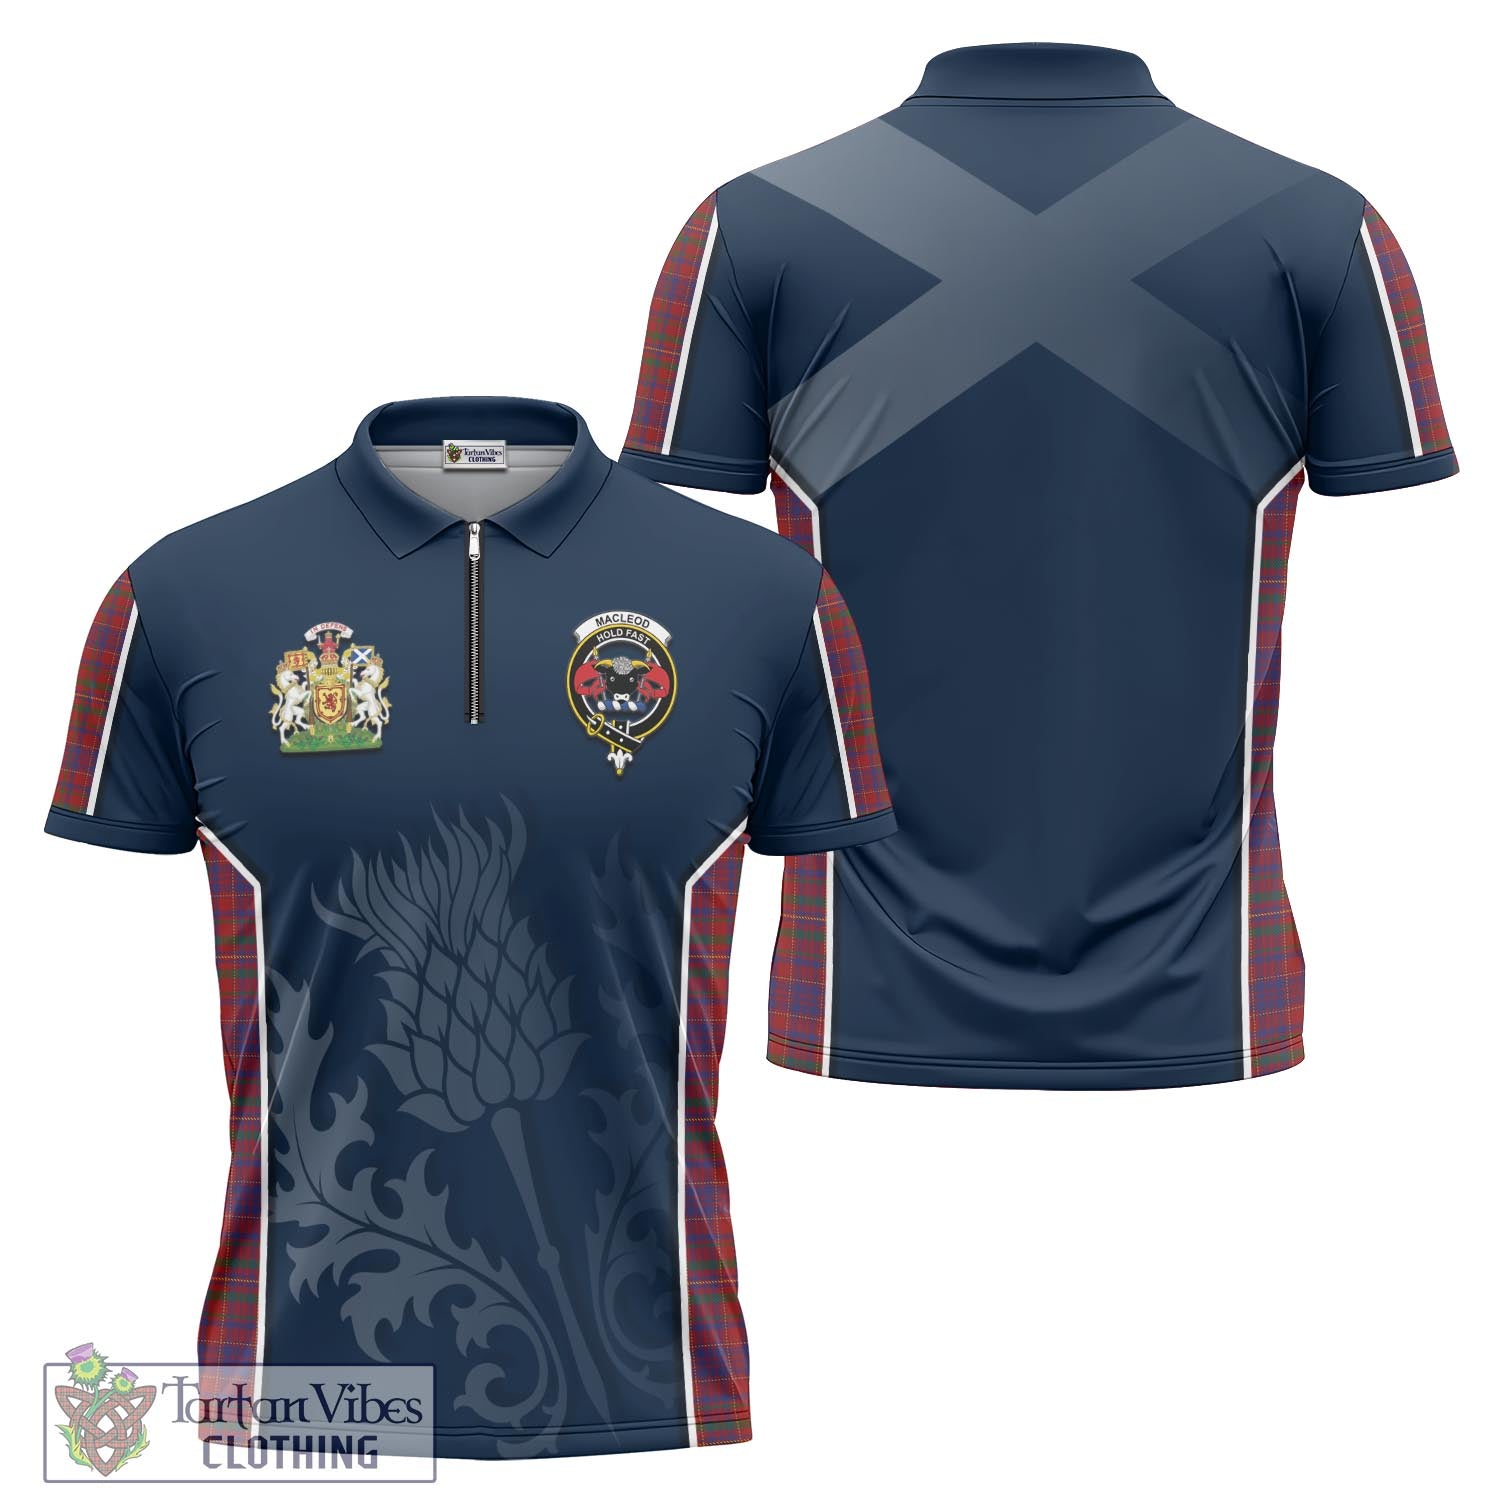 Tartan Vibes Clothing MacLeod Red Tartan Zipper Polo Shirt with Family Crest and Scottish Thistle Vibes Sport Style